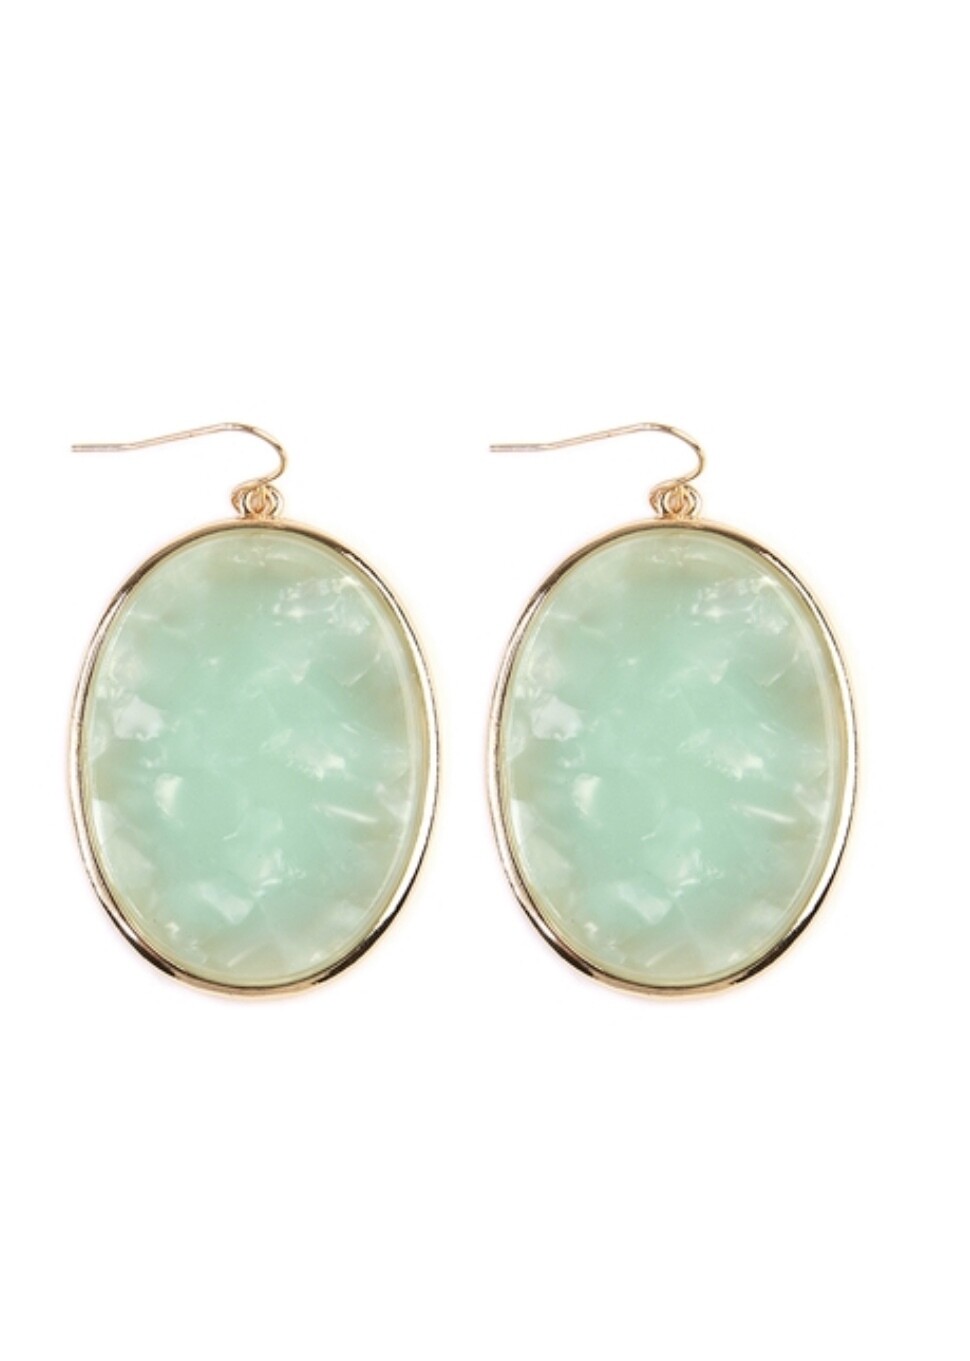 $10 Mint faceted oval shape marble earring